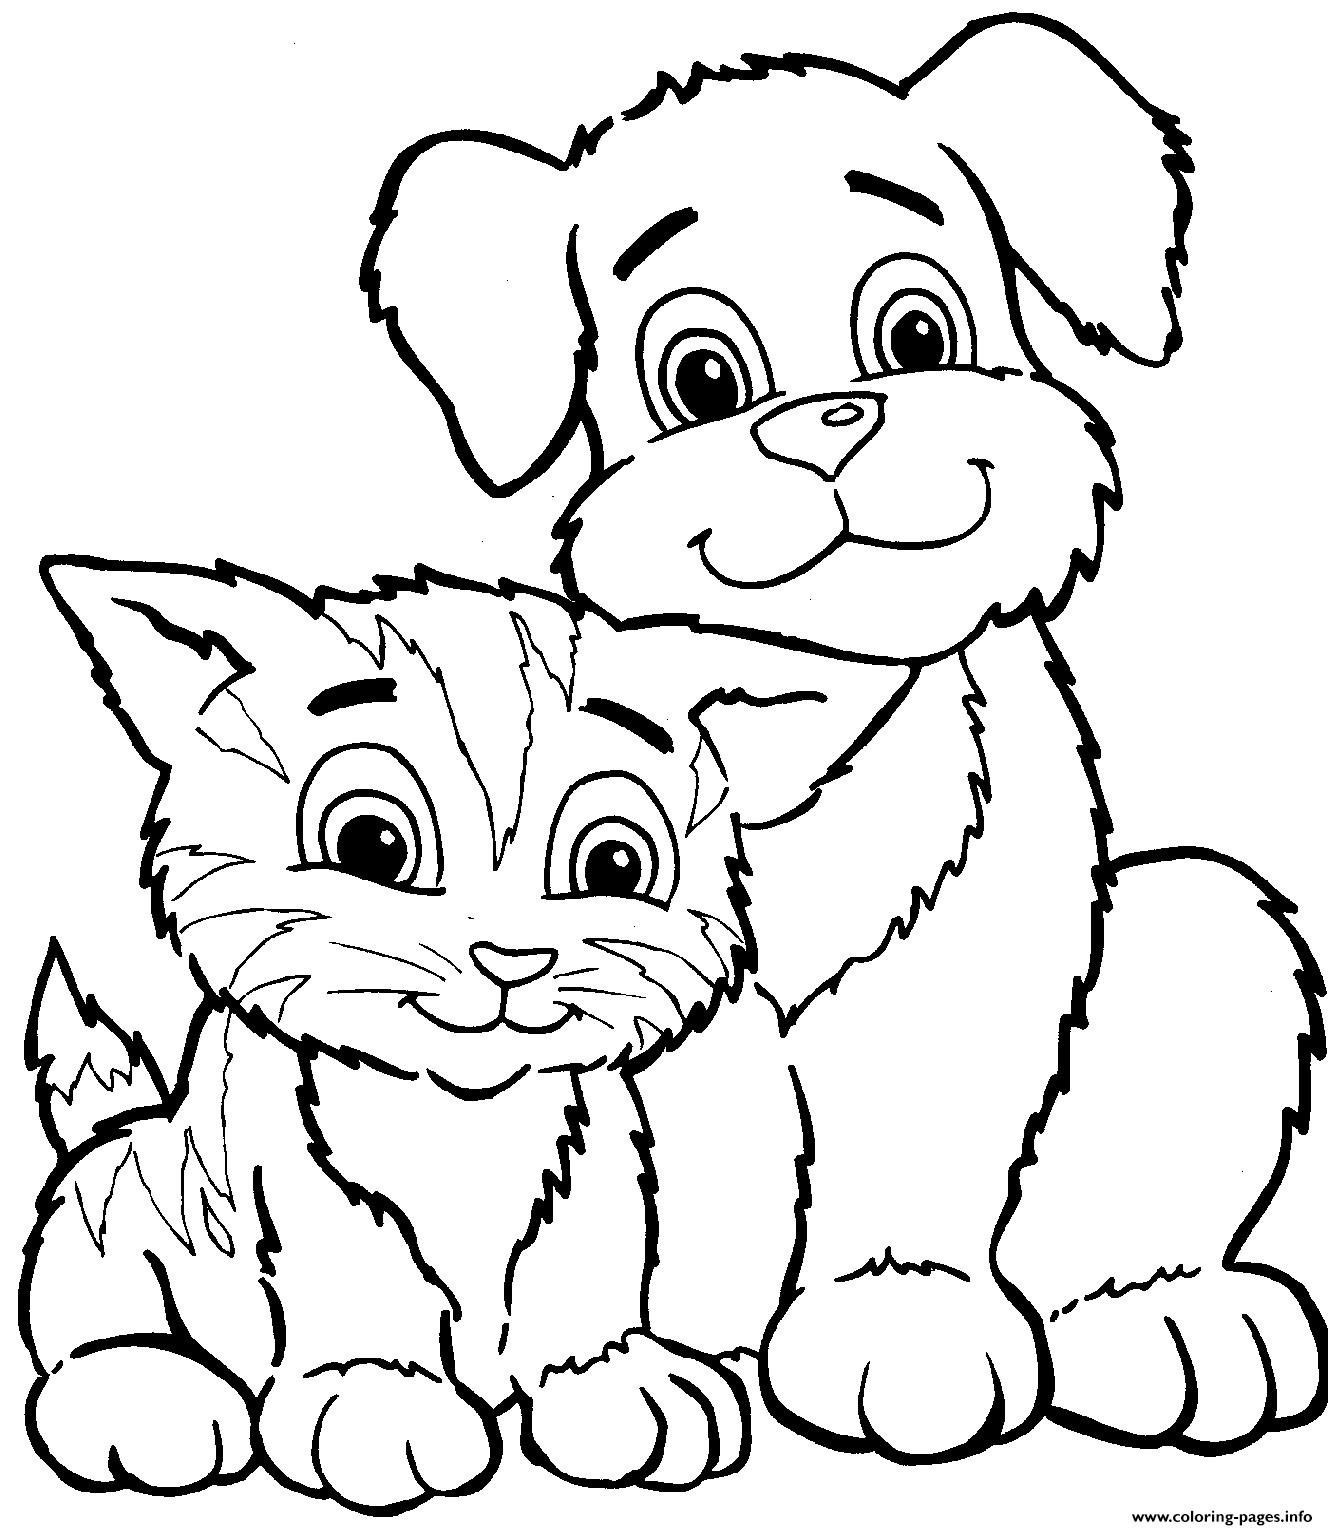 Cute Cat And Dog Sd7c2 coloring pages